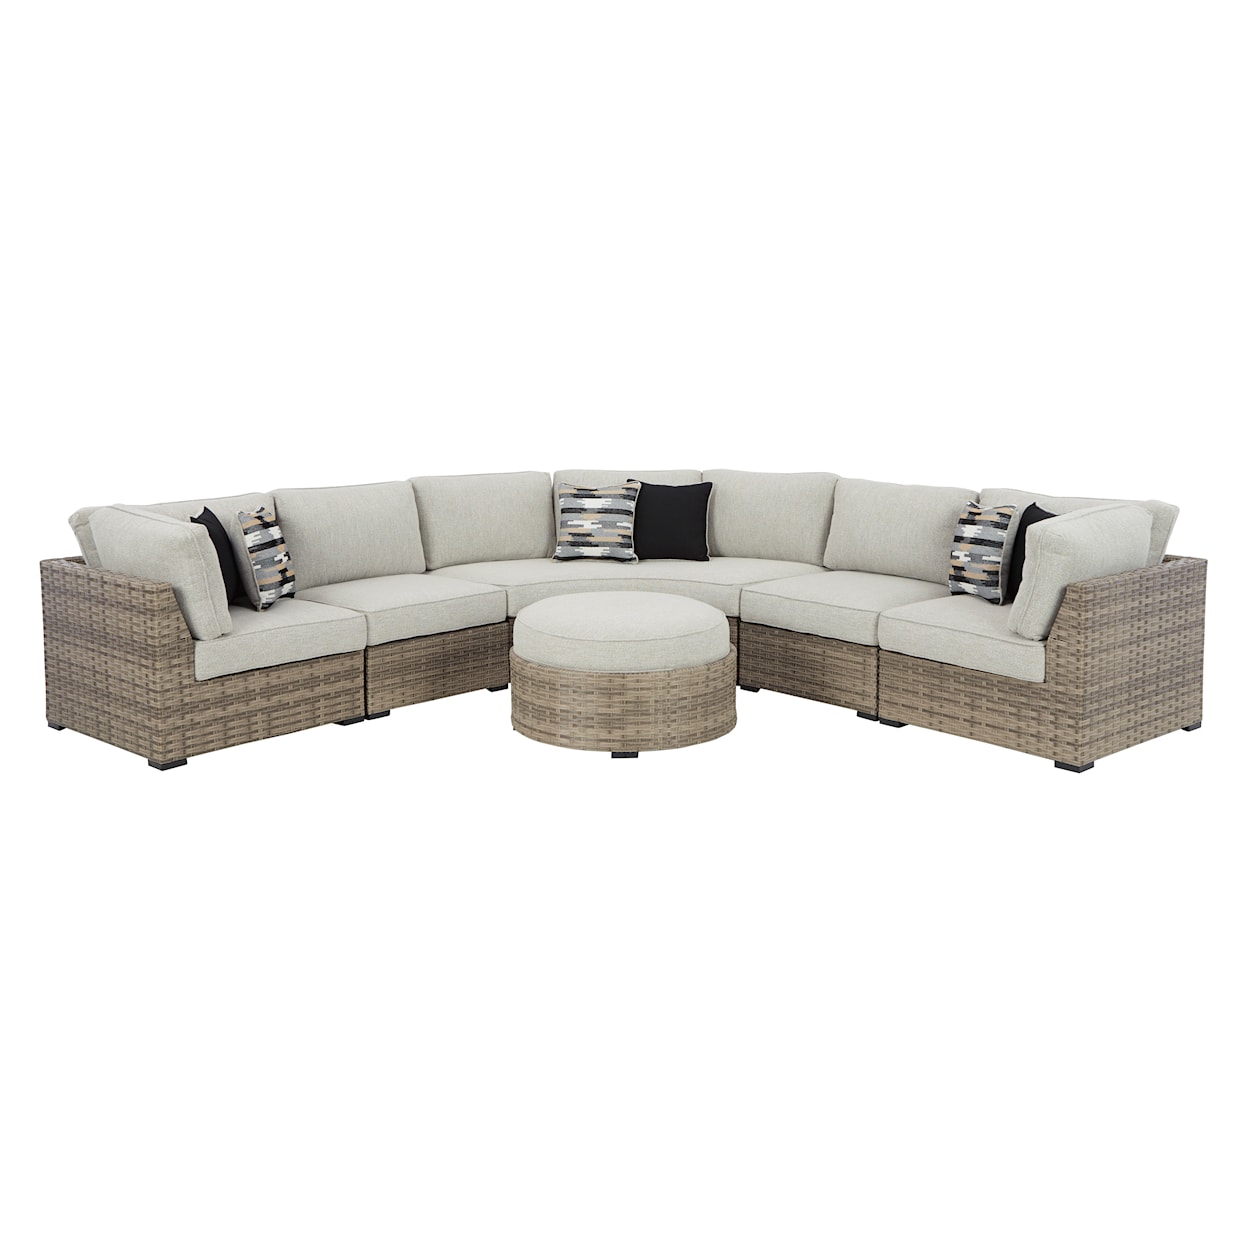 Ashley Furniture Signature Design Calworth 4-Piece Outdoor Sectional